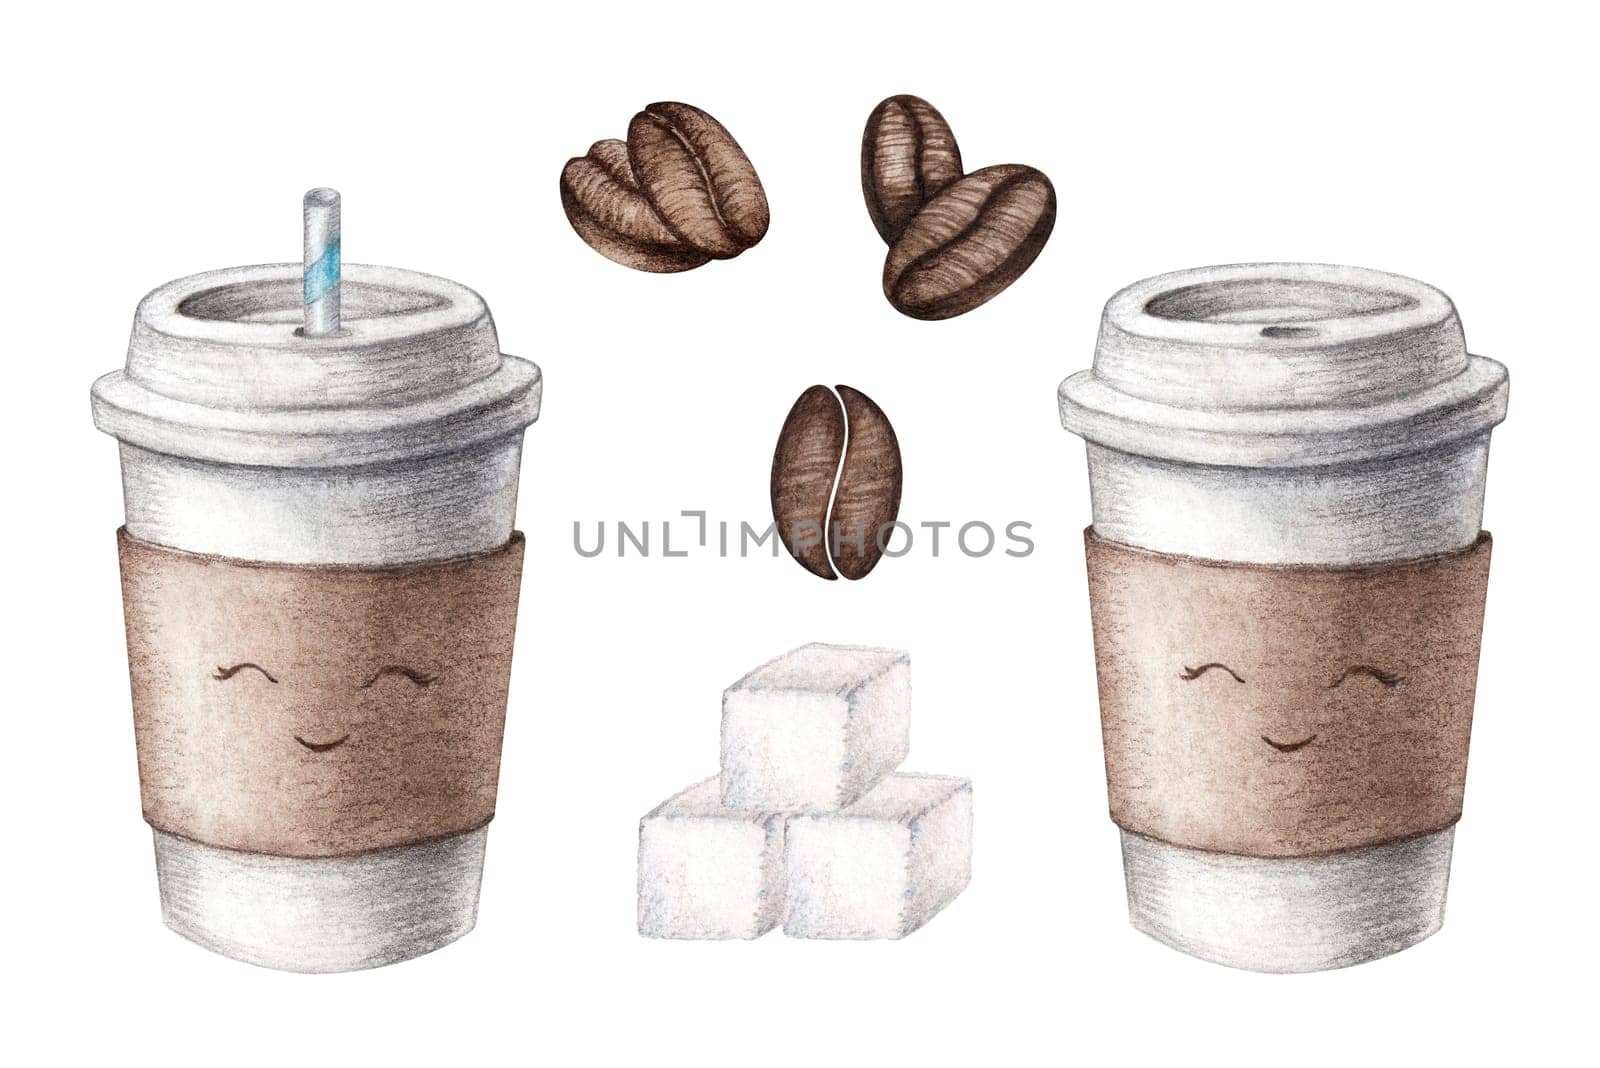 Hand drawn watercolor cardboard paper cute coffee cup, sugar cubes, beans set with a straw, take away to go, isolated on white background. Food illustration, coffee to go. Watercolor painting by Anny_Sketches